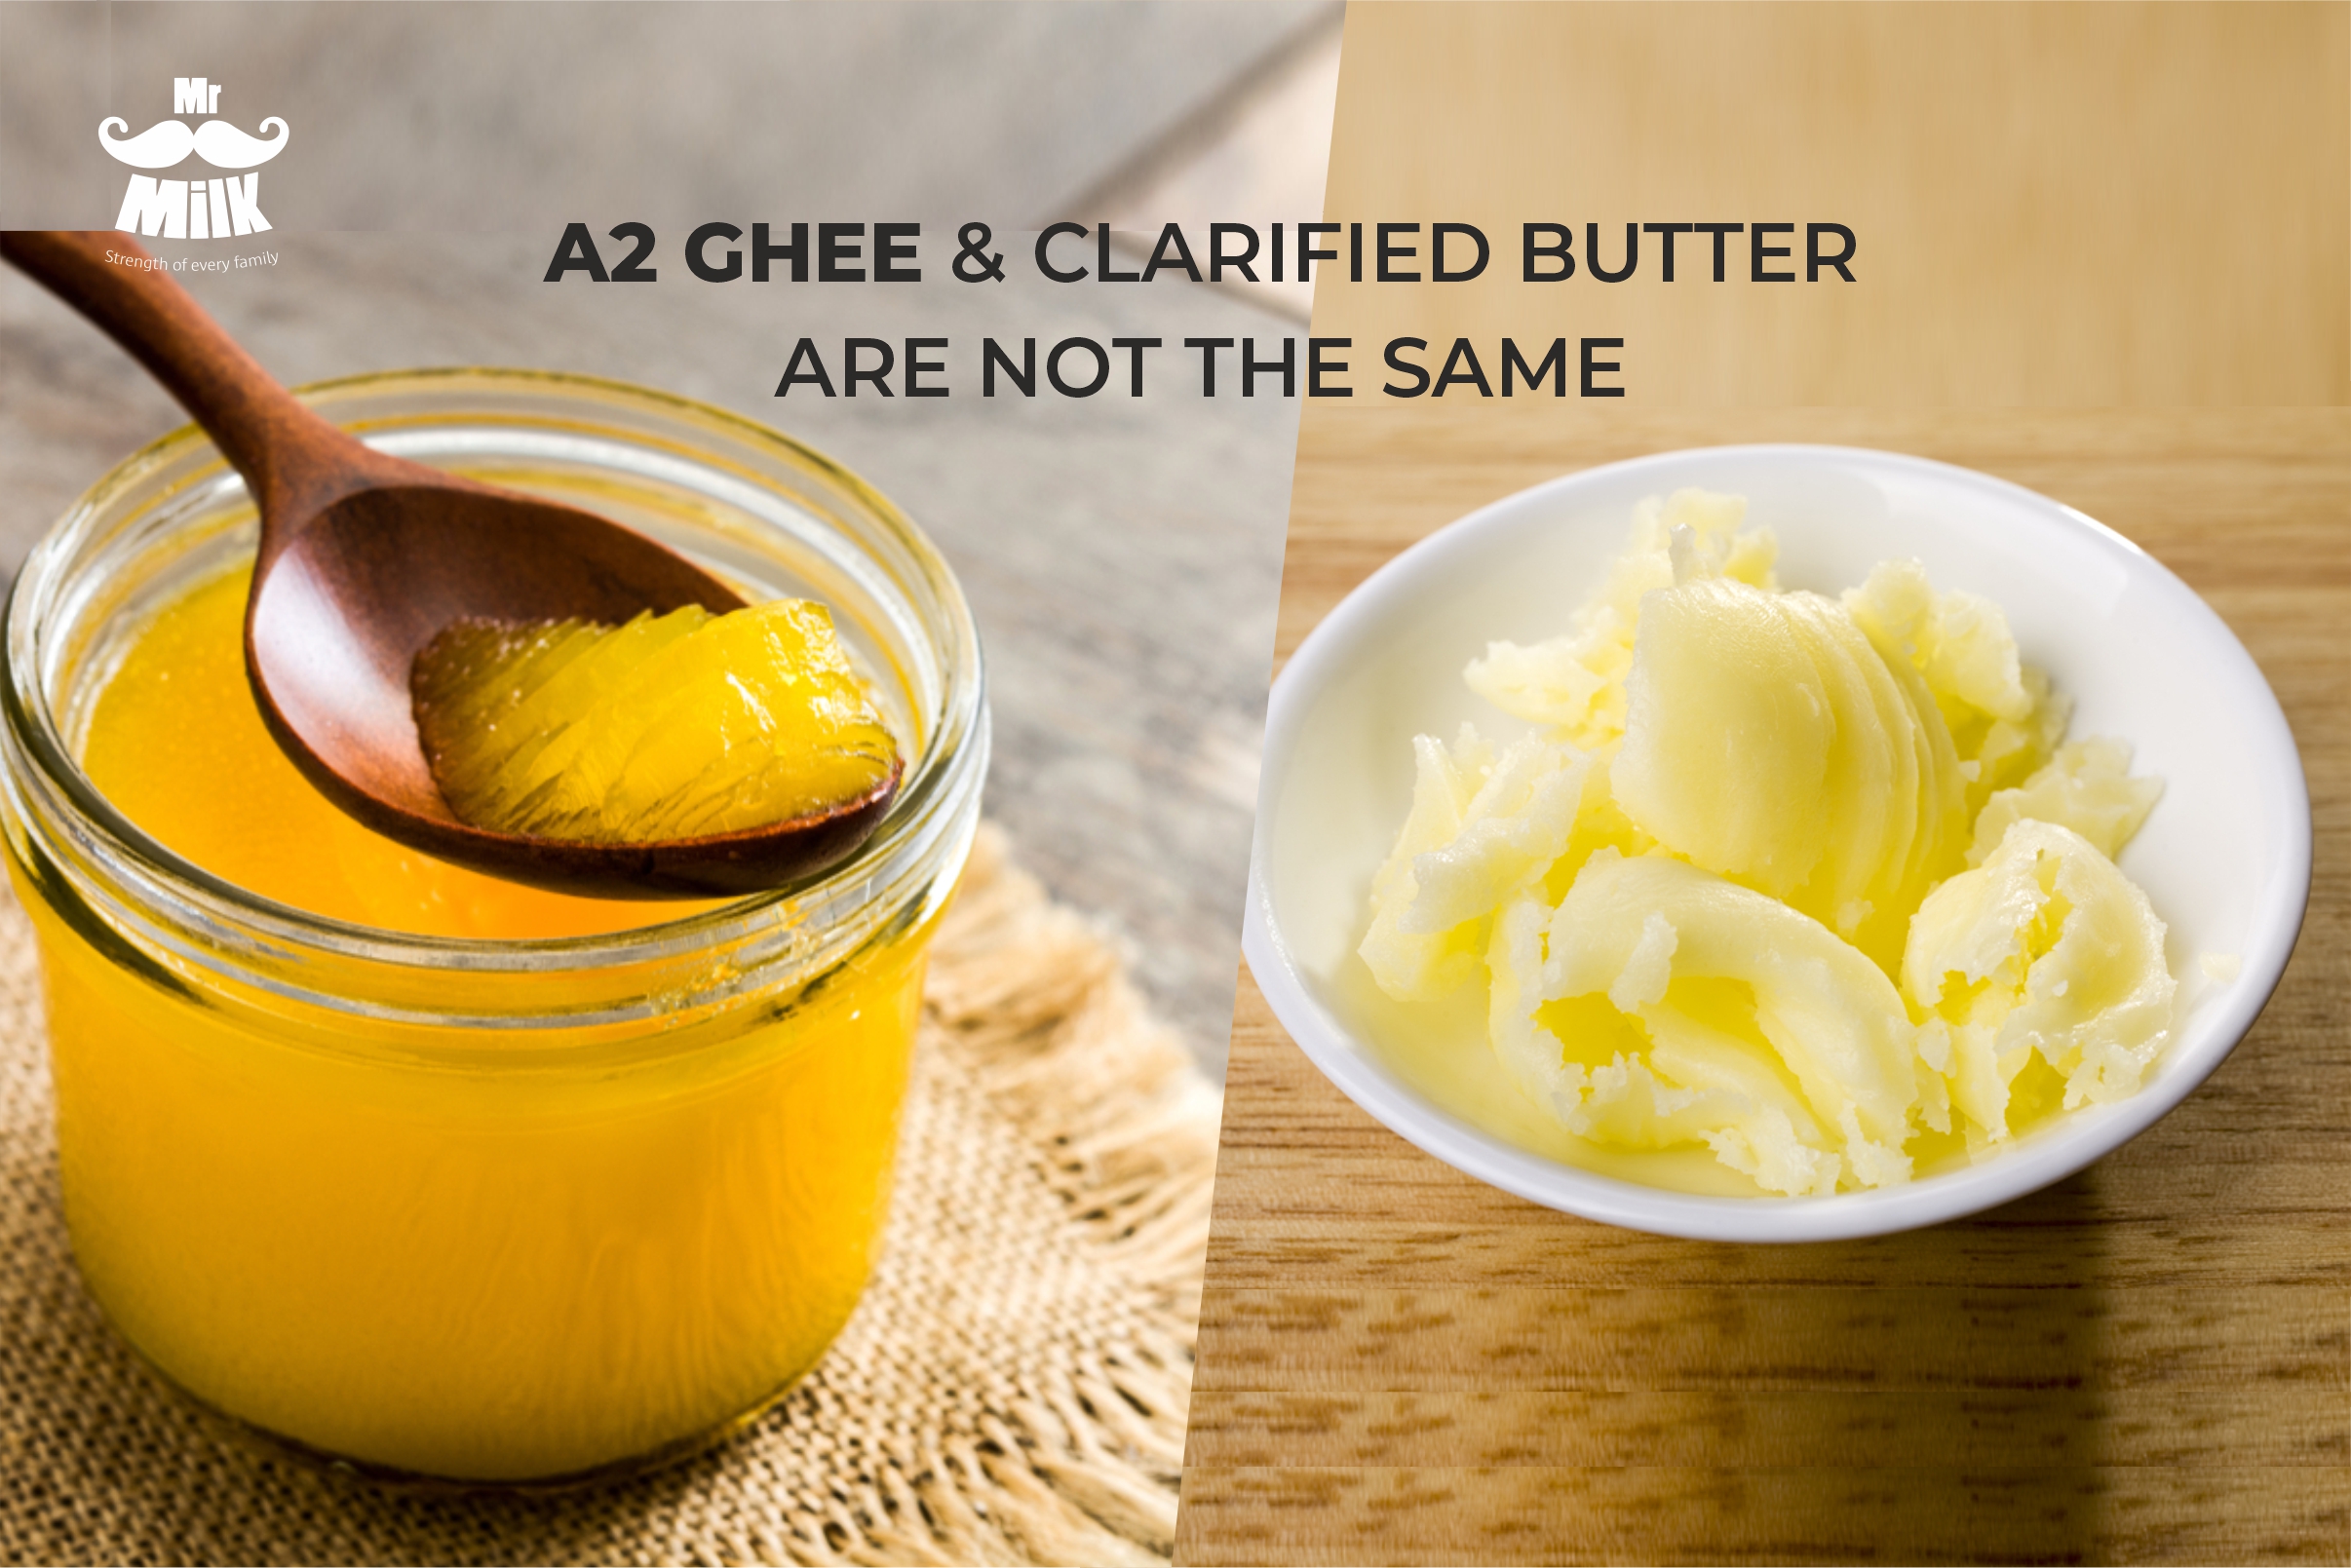 Desi A2 ghee and clarified butter are not the same. Here’s what sets them apart.